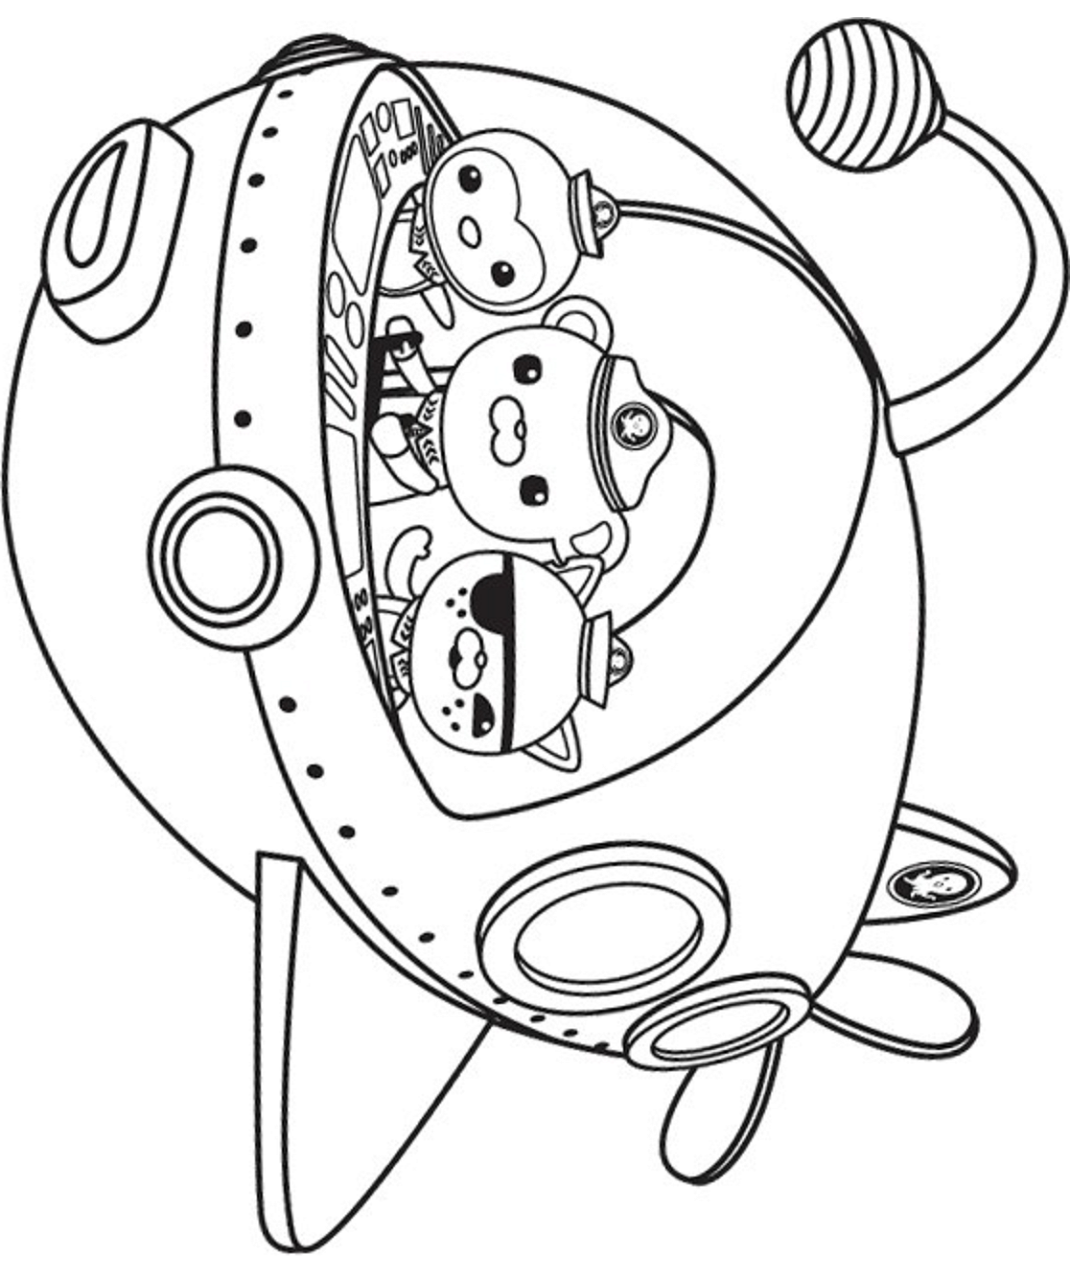 Peso, Captain, Kwazii In Octonauts Ship Coloring Page - Free Printable